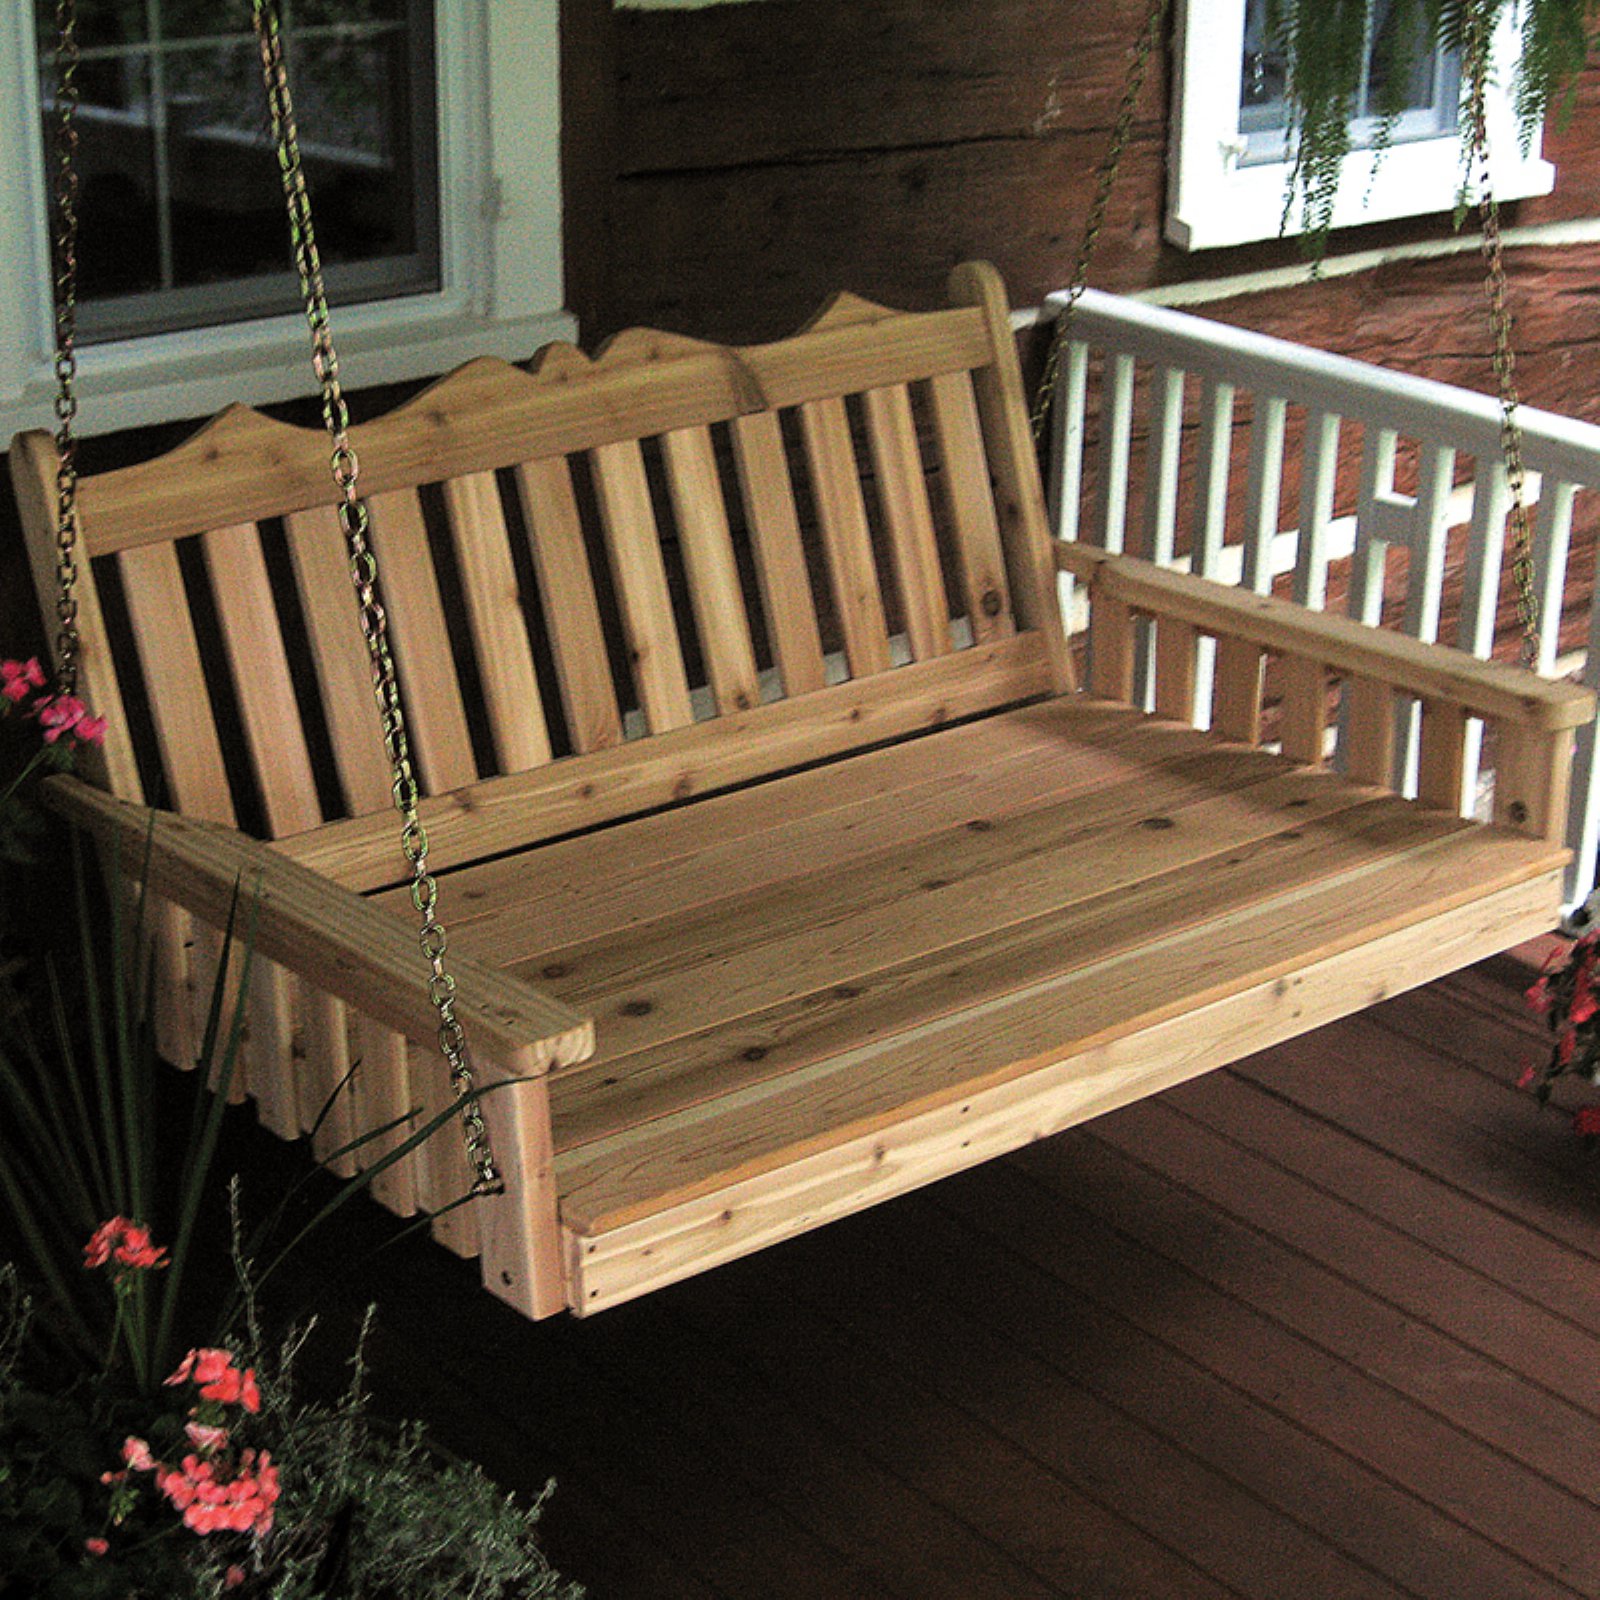 A &amp; L Furniture Western Red Cedar Royal English Swing Bed - image 1 of 1